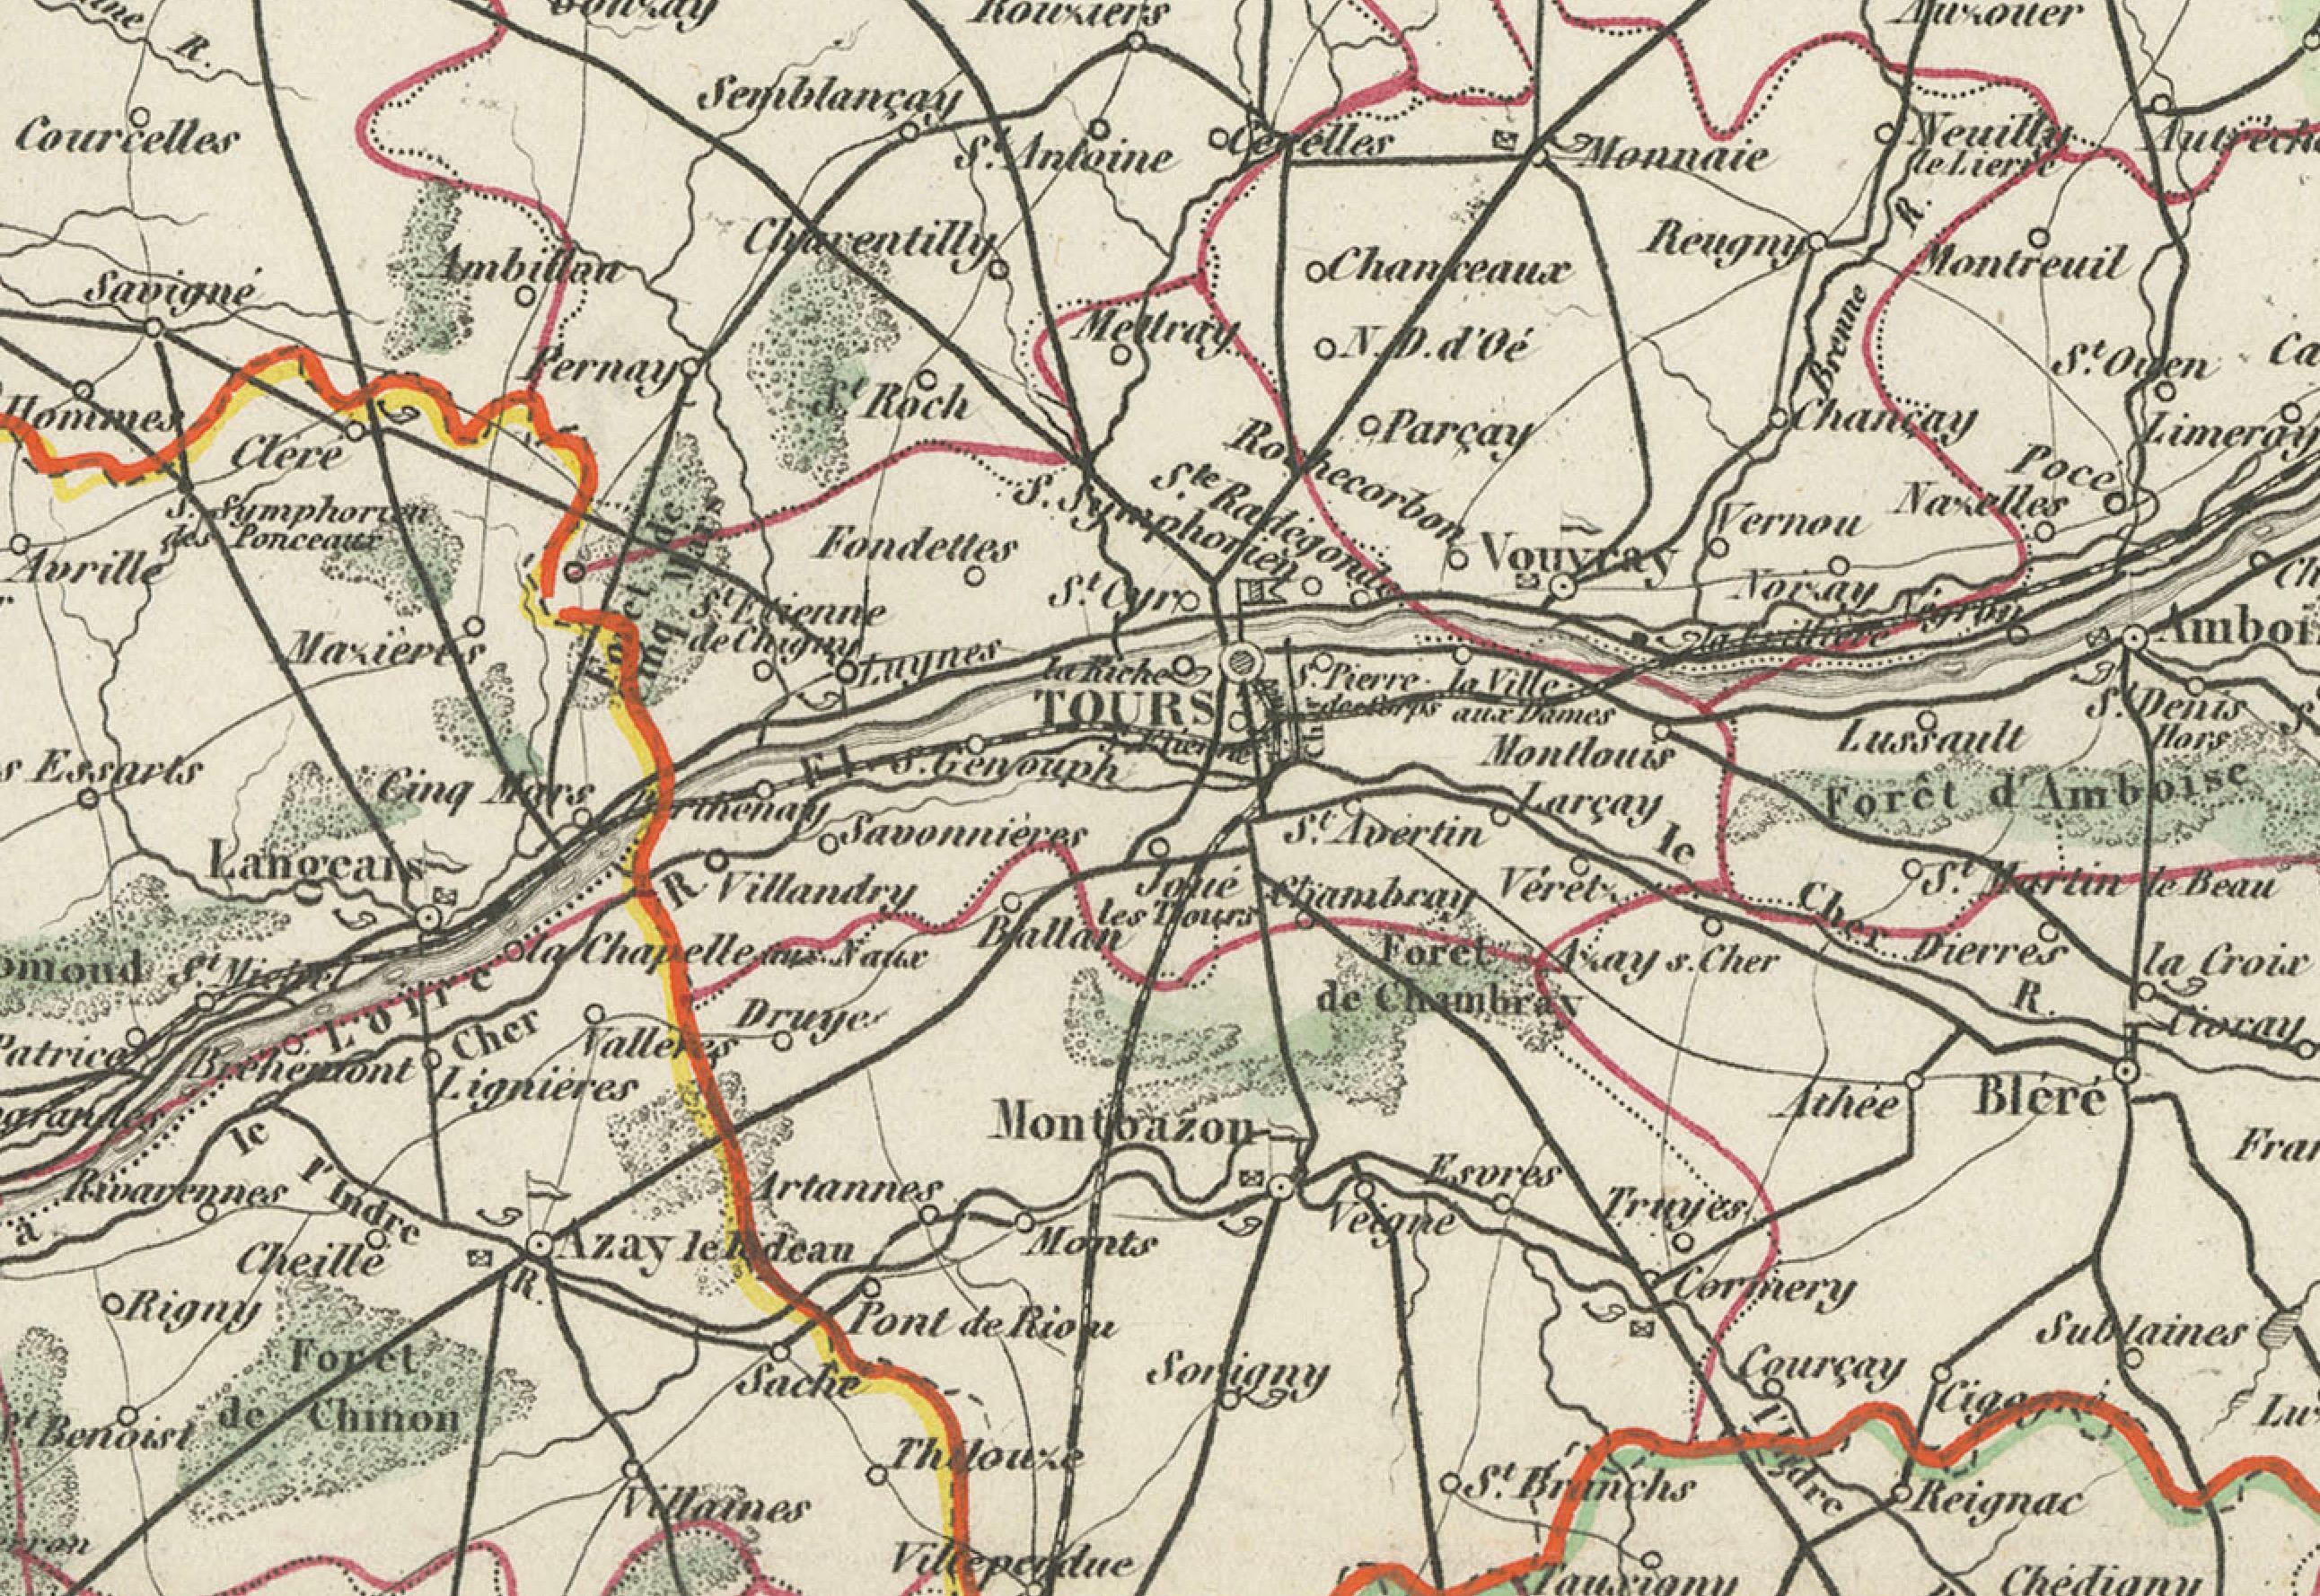 Mapping History: The Decorative Cartography of Indre-et-Loire von Levasseur, 1856 im Angebot 3